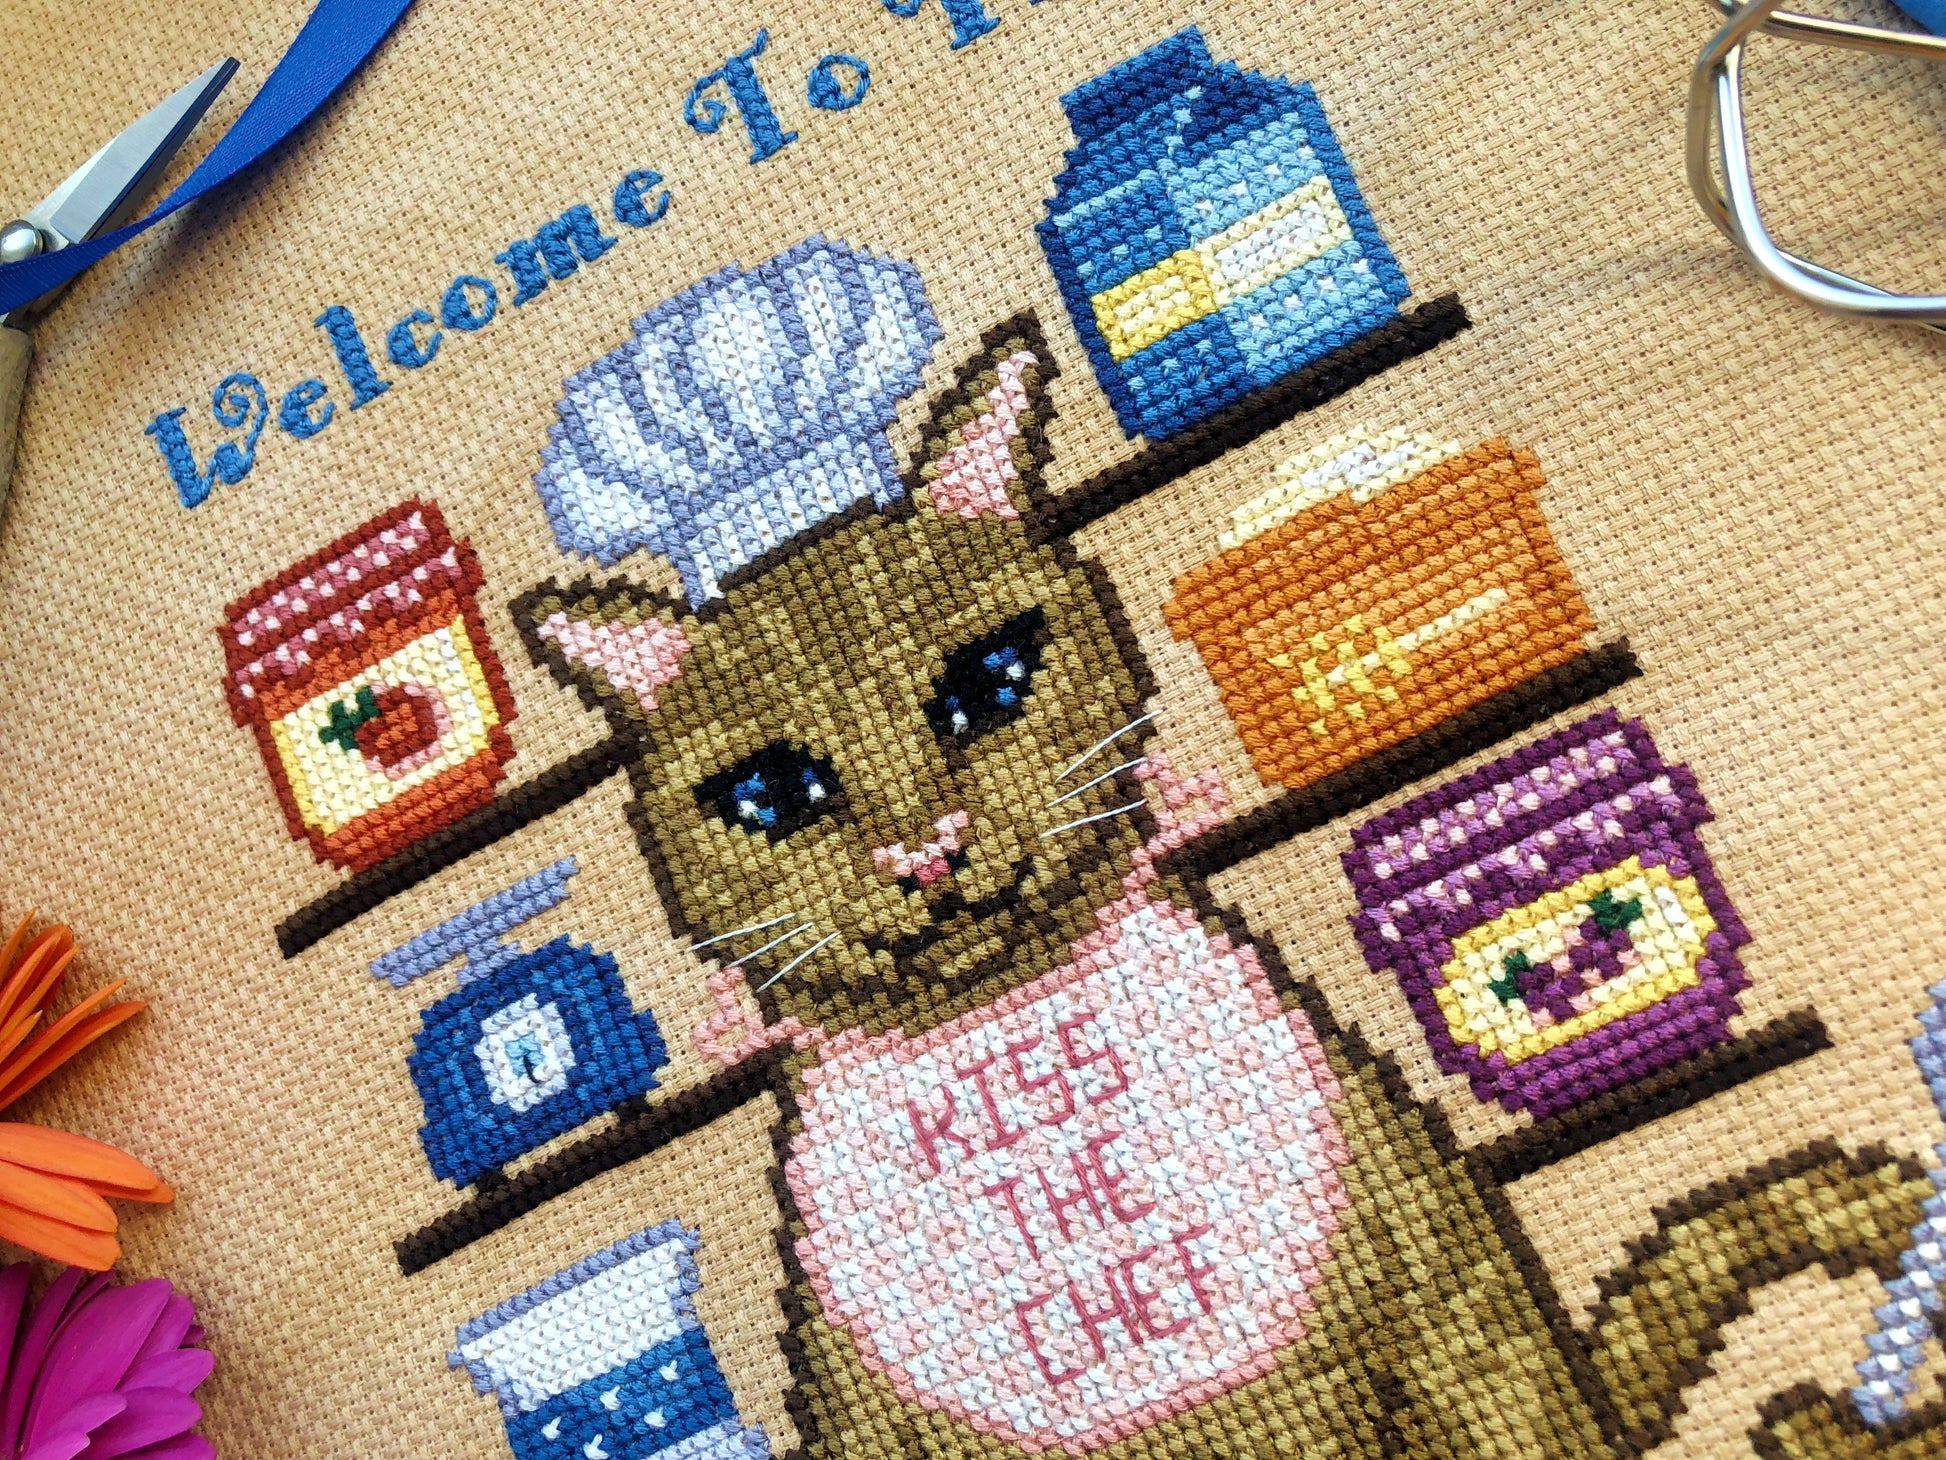 Closeup of cat baker. He is wearing a white chef's hat, and is wearing a checkered apron that says "Kiss the Chef". Colors are orange, brown, pink, purple, red, yellow and blue. Cat's eyes are blue, and he has whiskers. Stitches are neat and tidy.